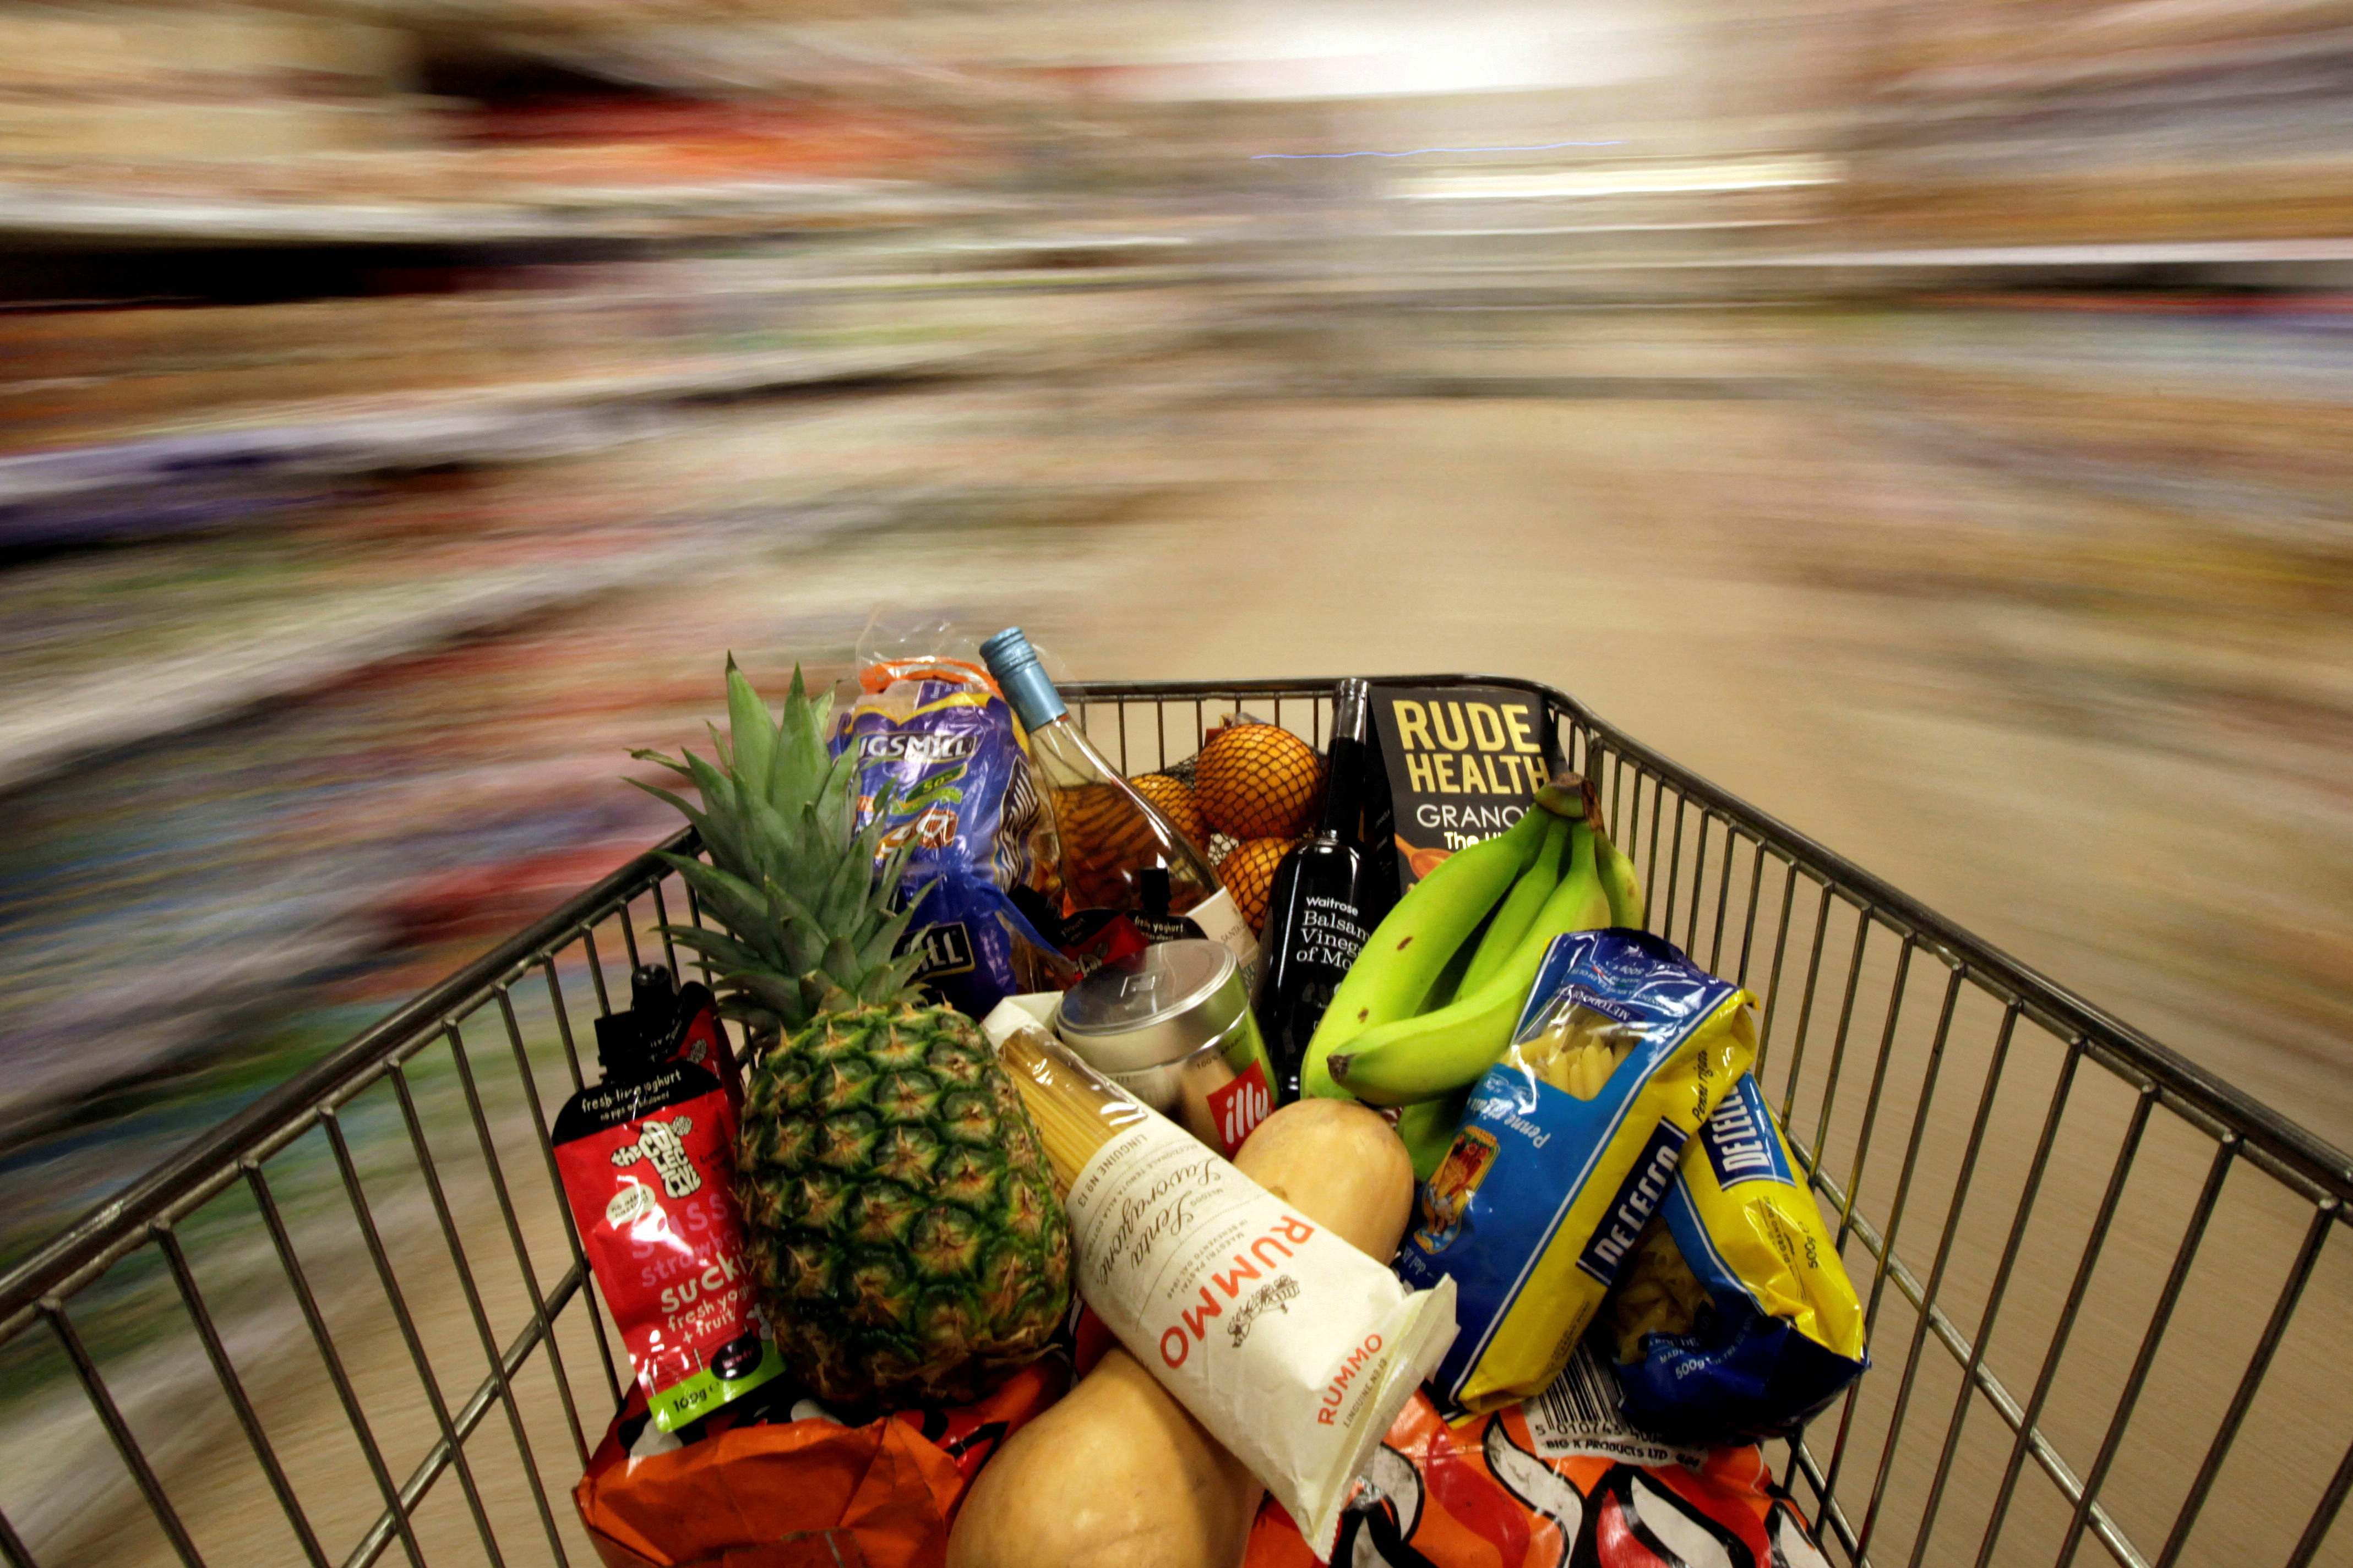 A shopping trolley is pushed around a supermarket in London